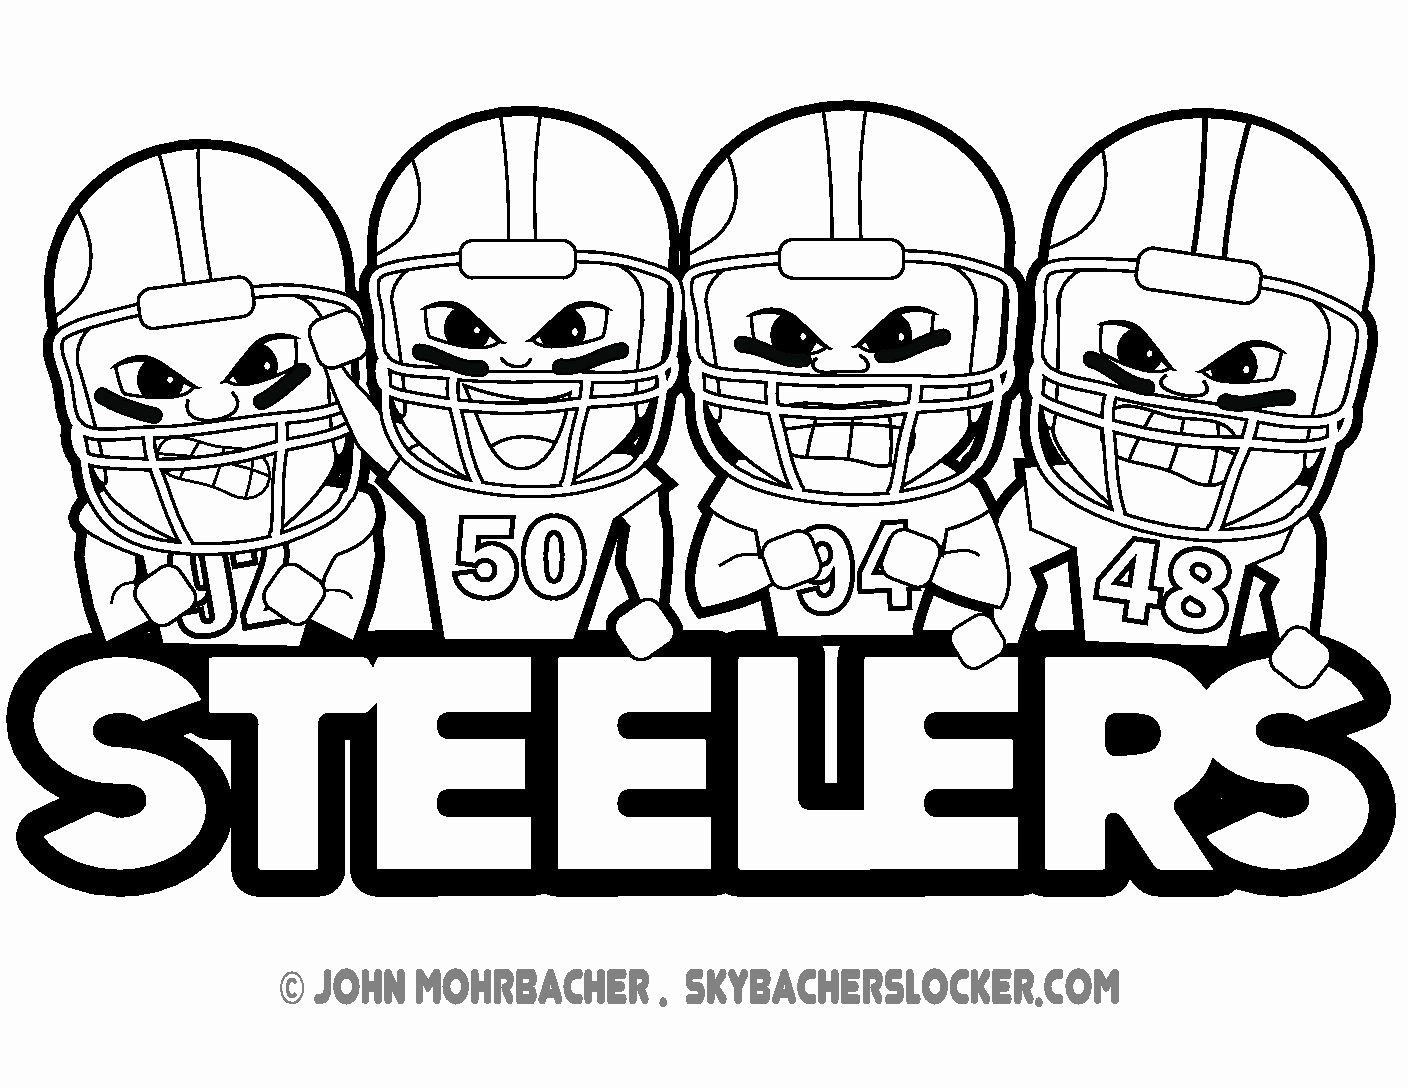 steelers-sketch-at-paintingvalley-explore-collection-of-steelers-sketch